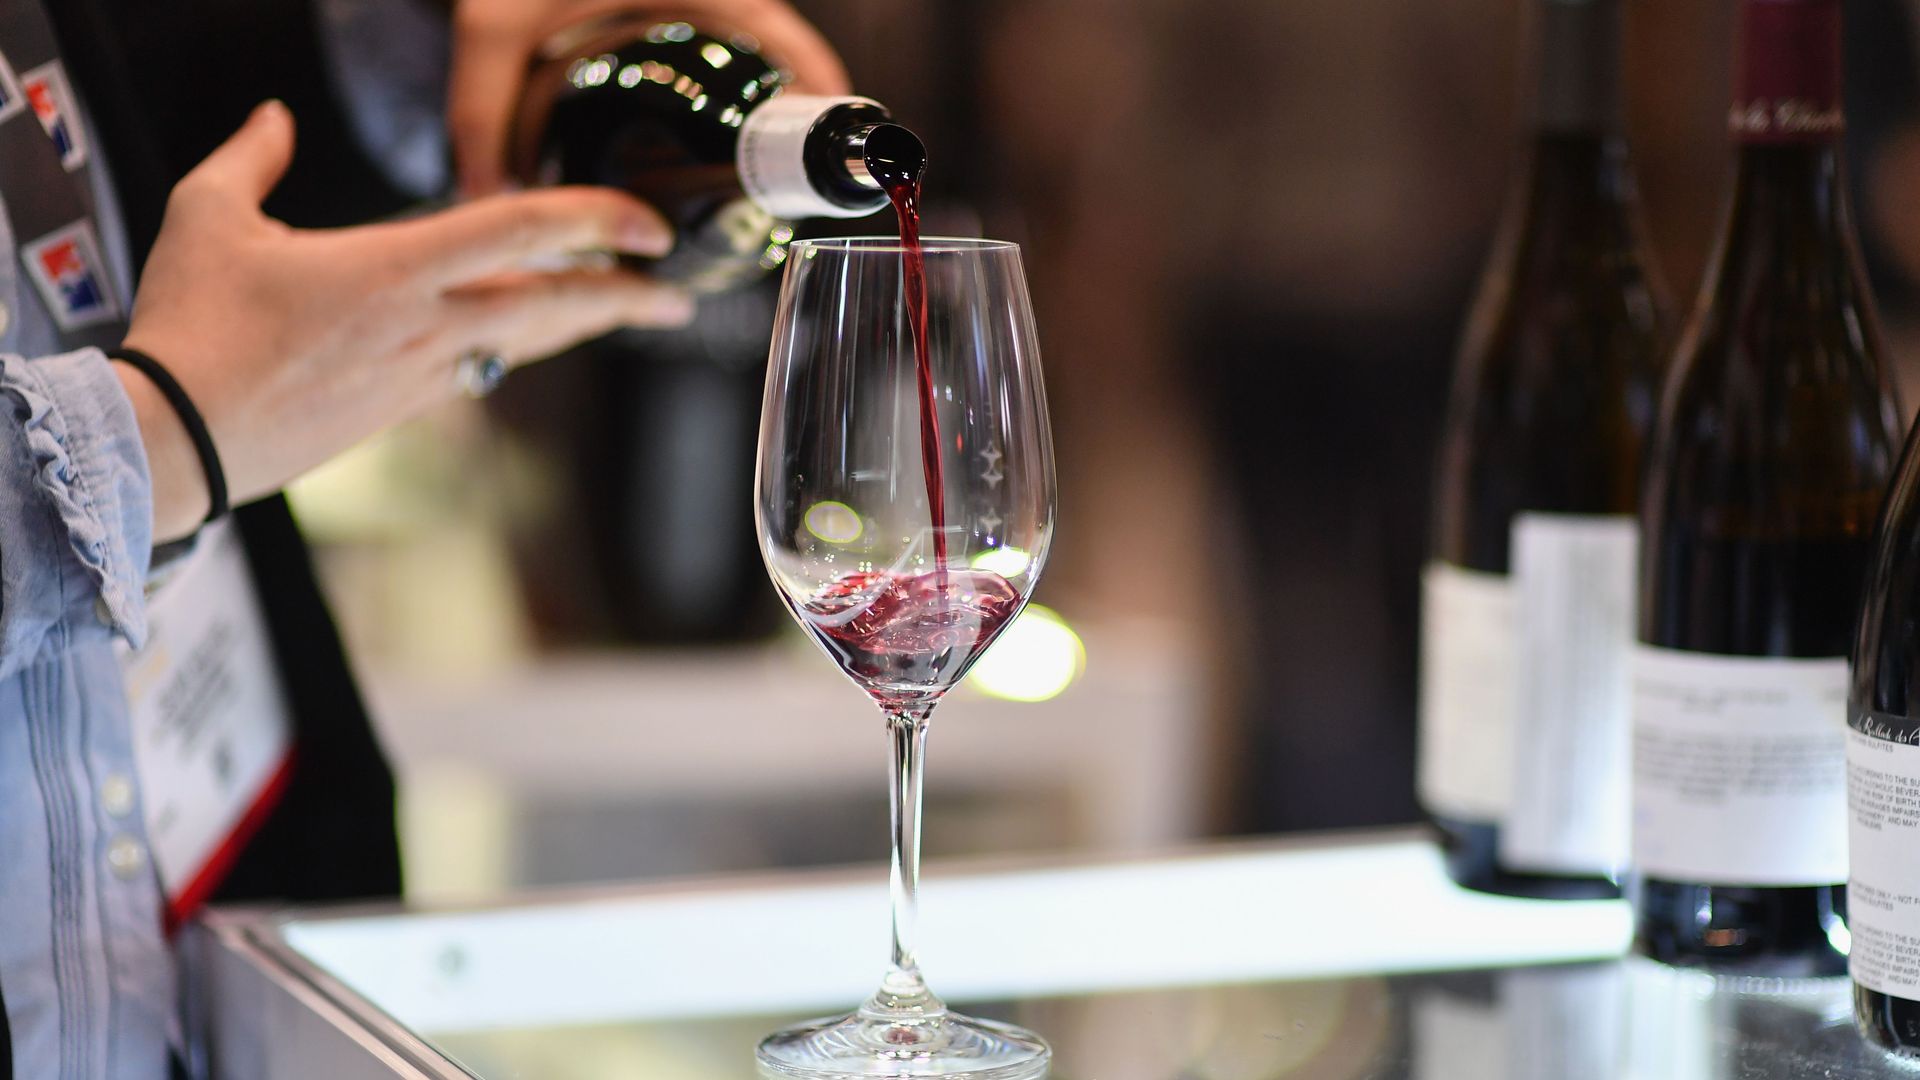 An exhibitor pours a glass of red wine during the Vinexpo at Javits Center on March 2, 2020 in New York City. 